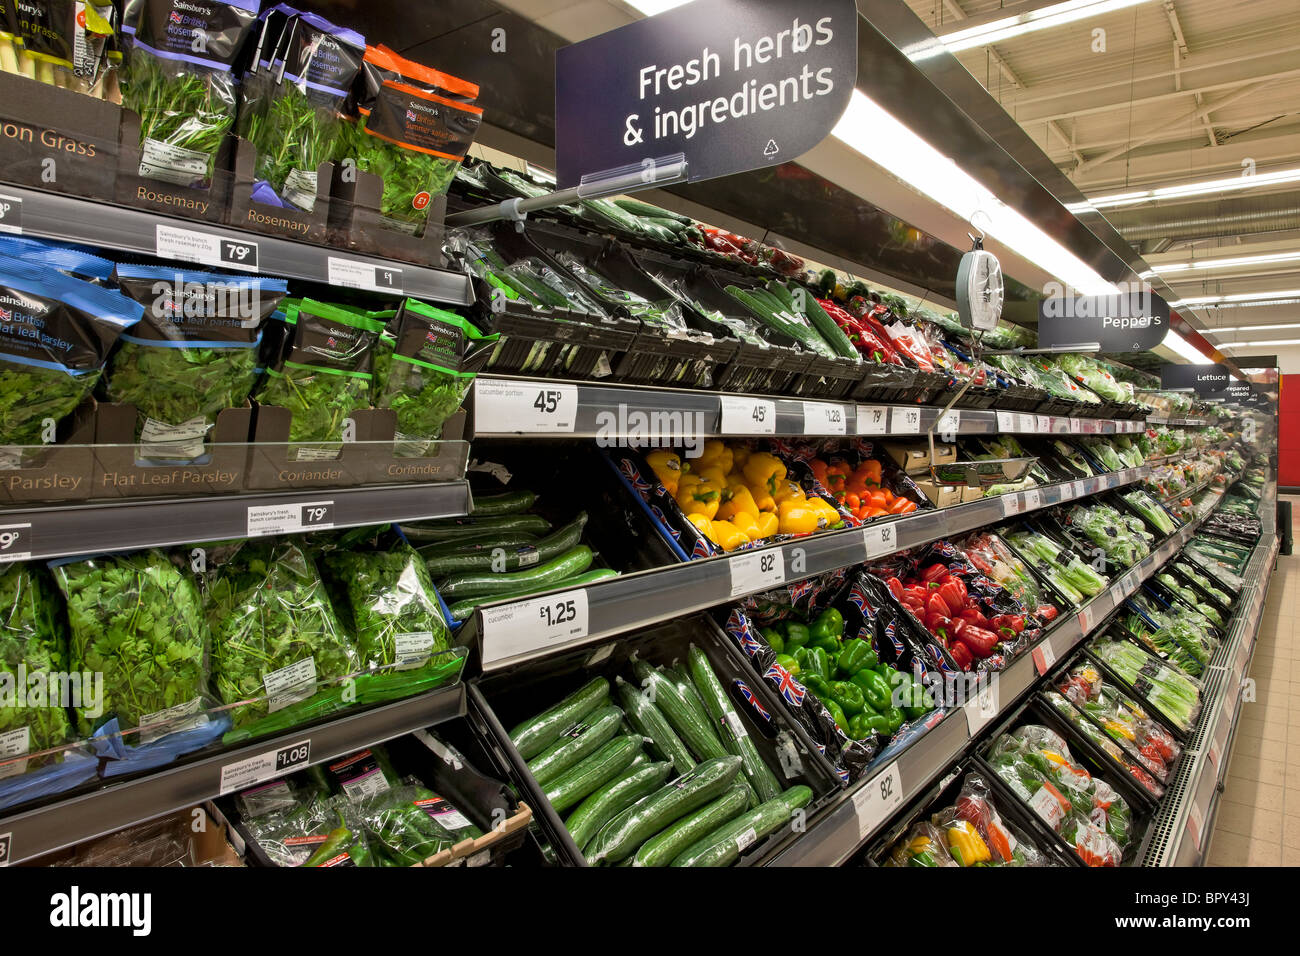 Display of salad and herbs in a supermarket. Stock Photo